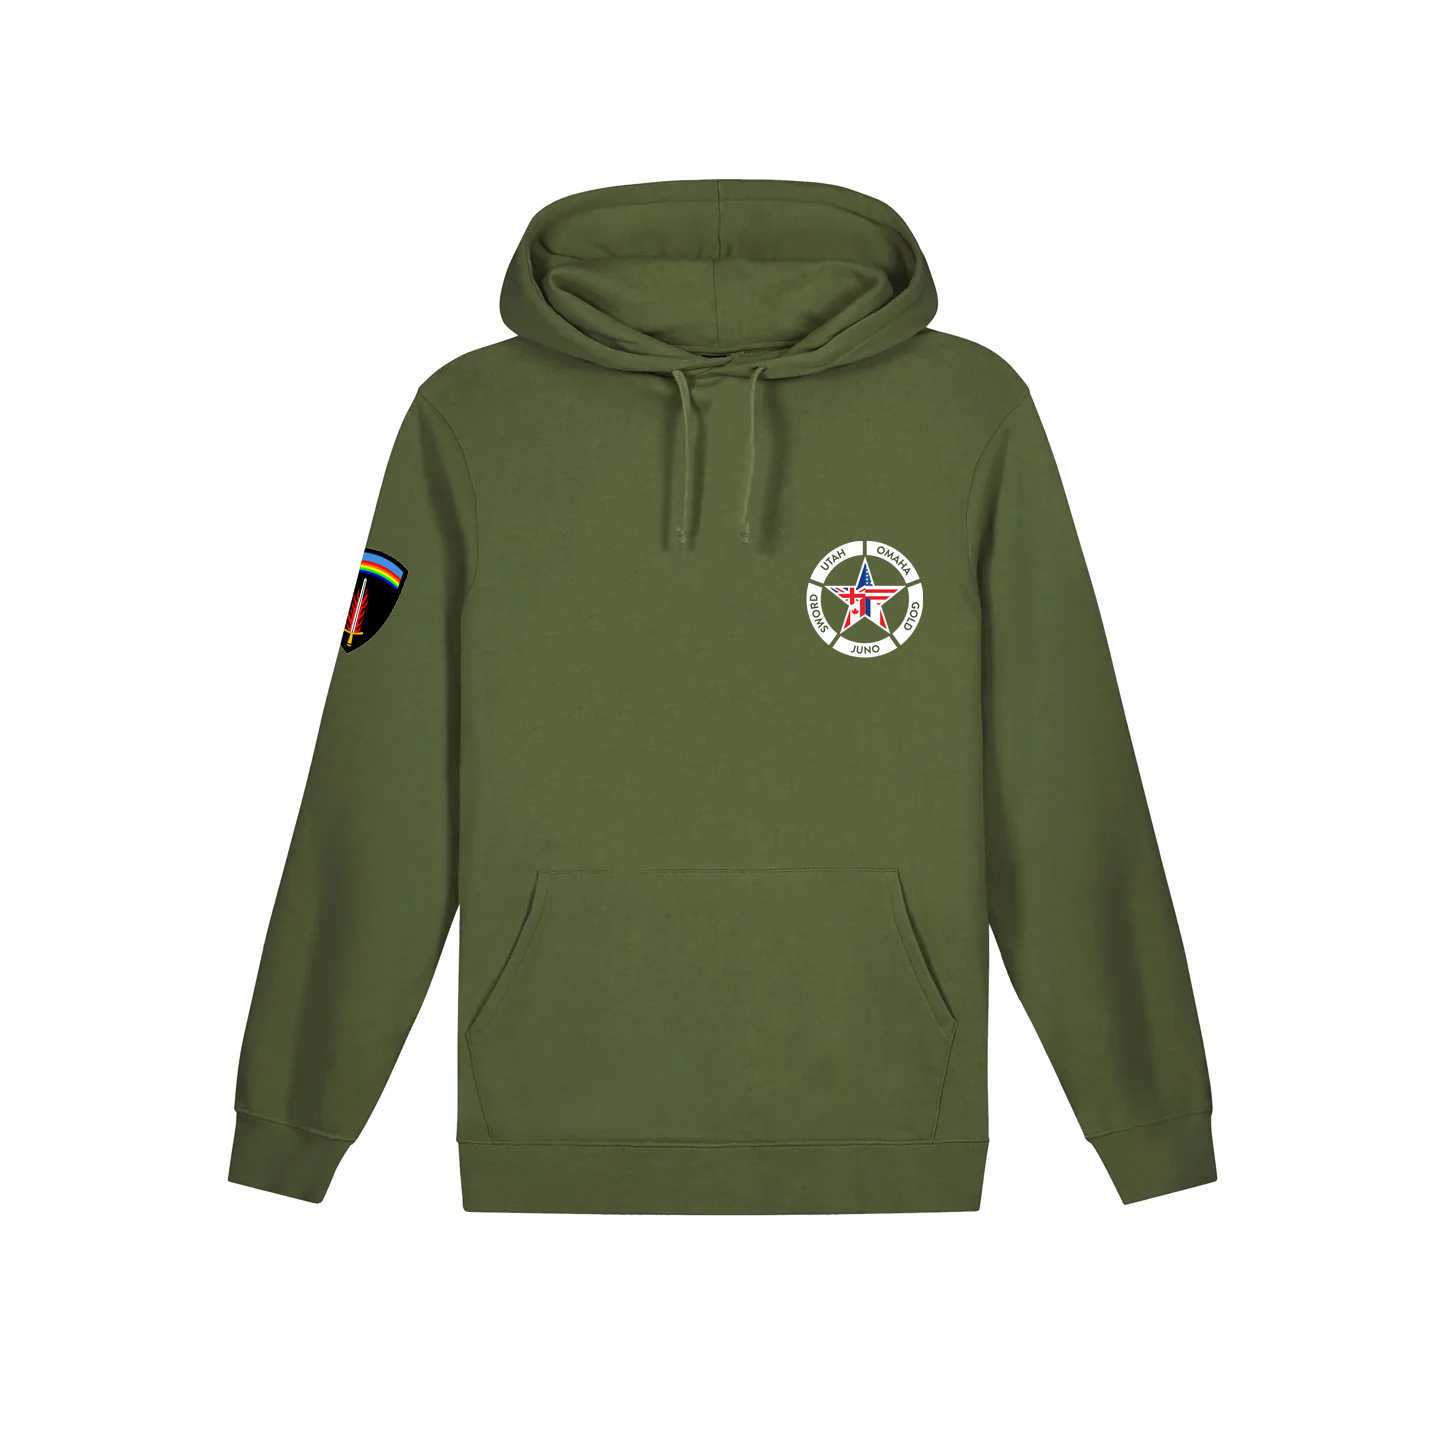 D-DAY 80 Star Hoodie Olive